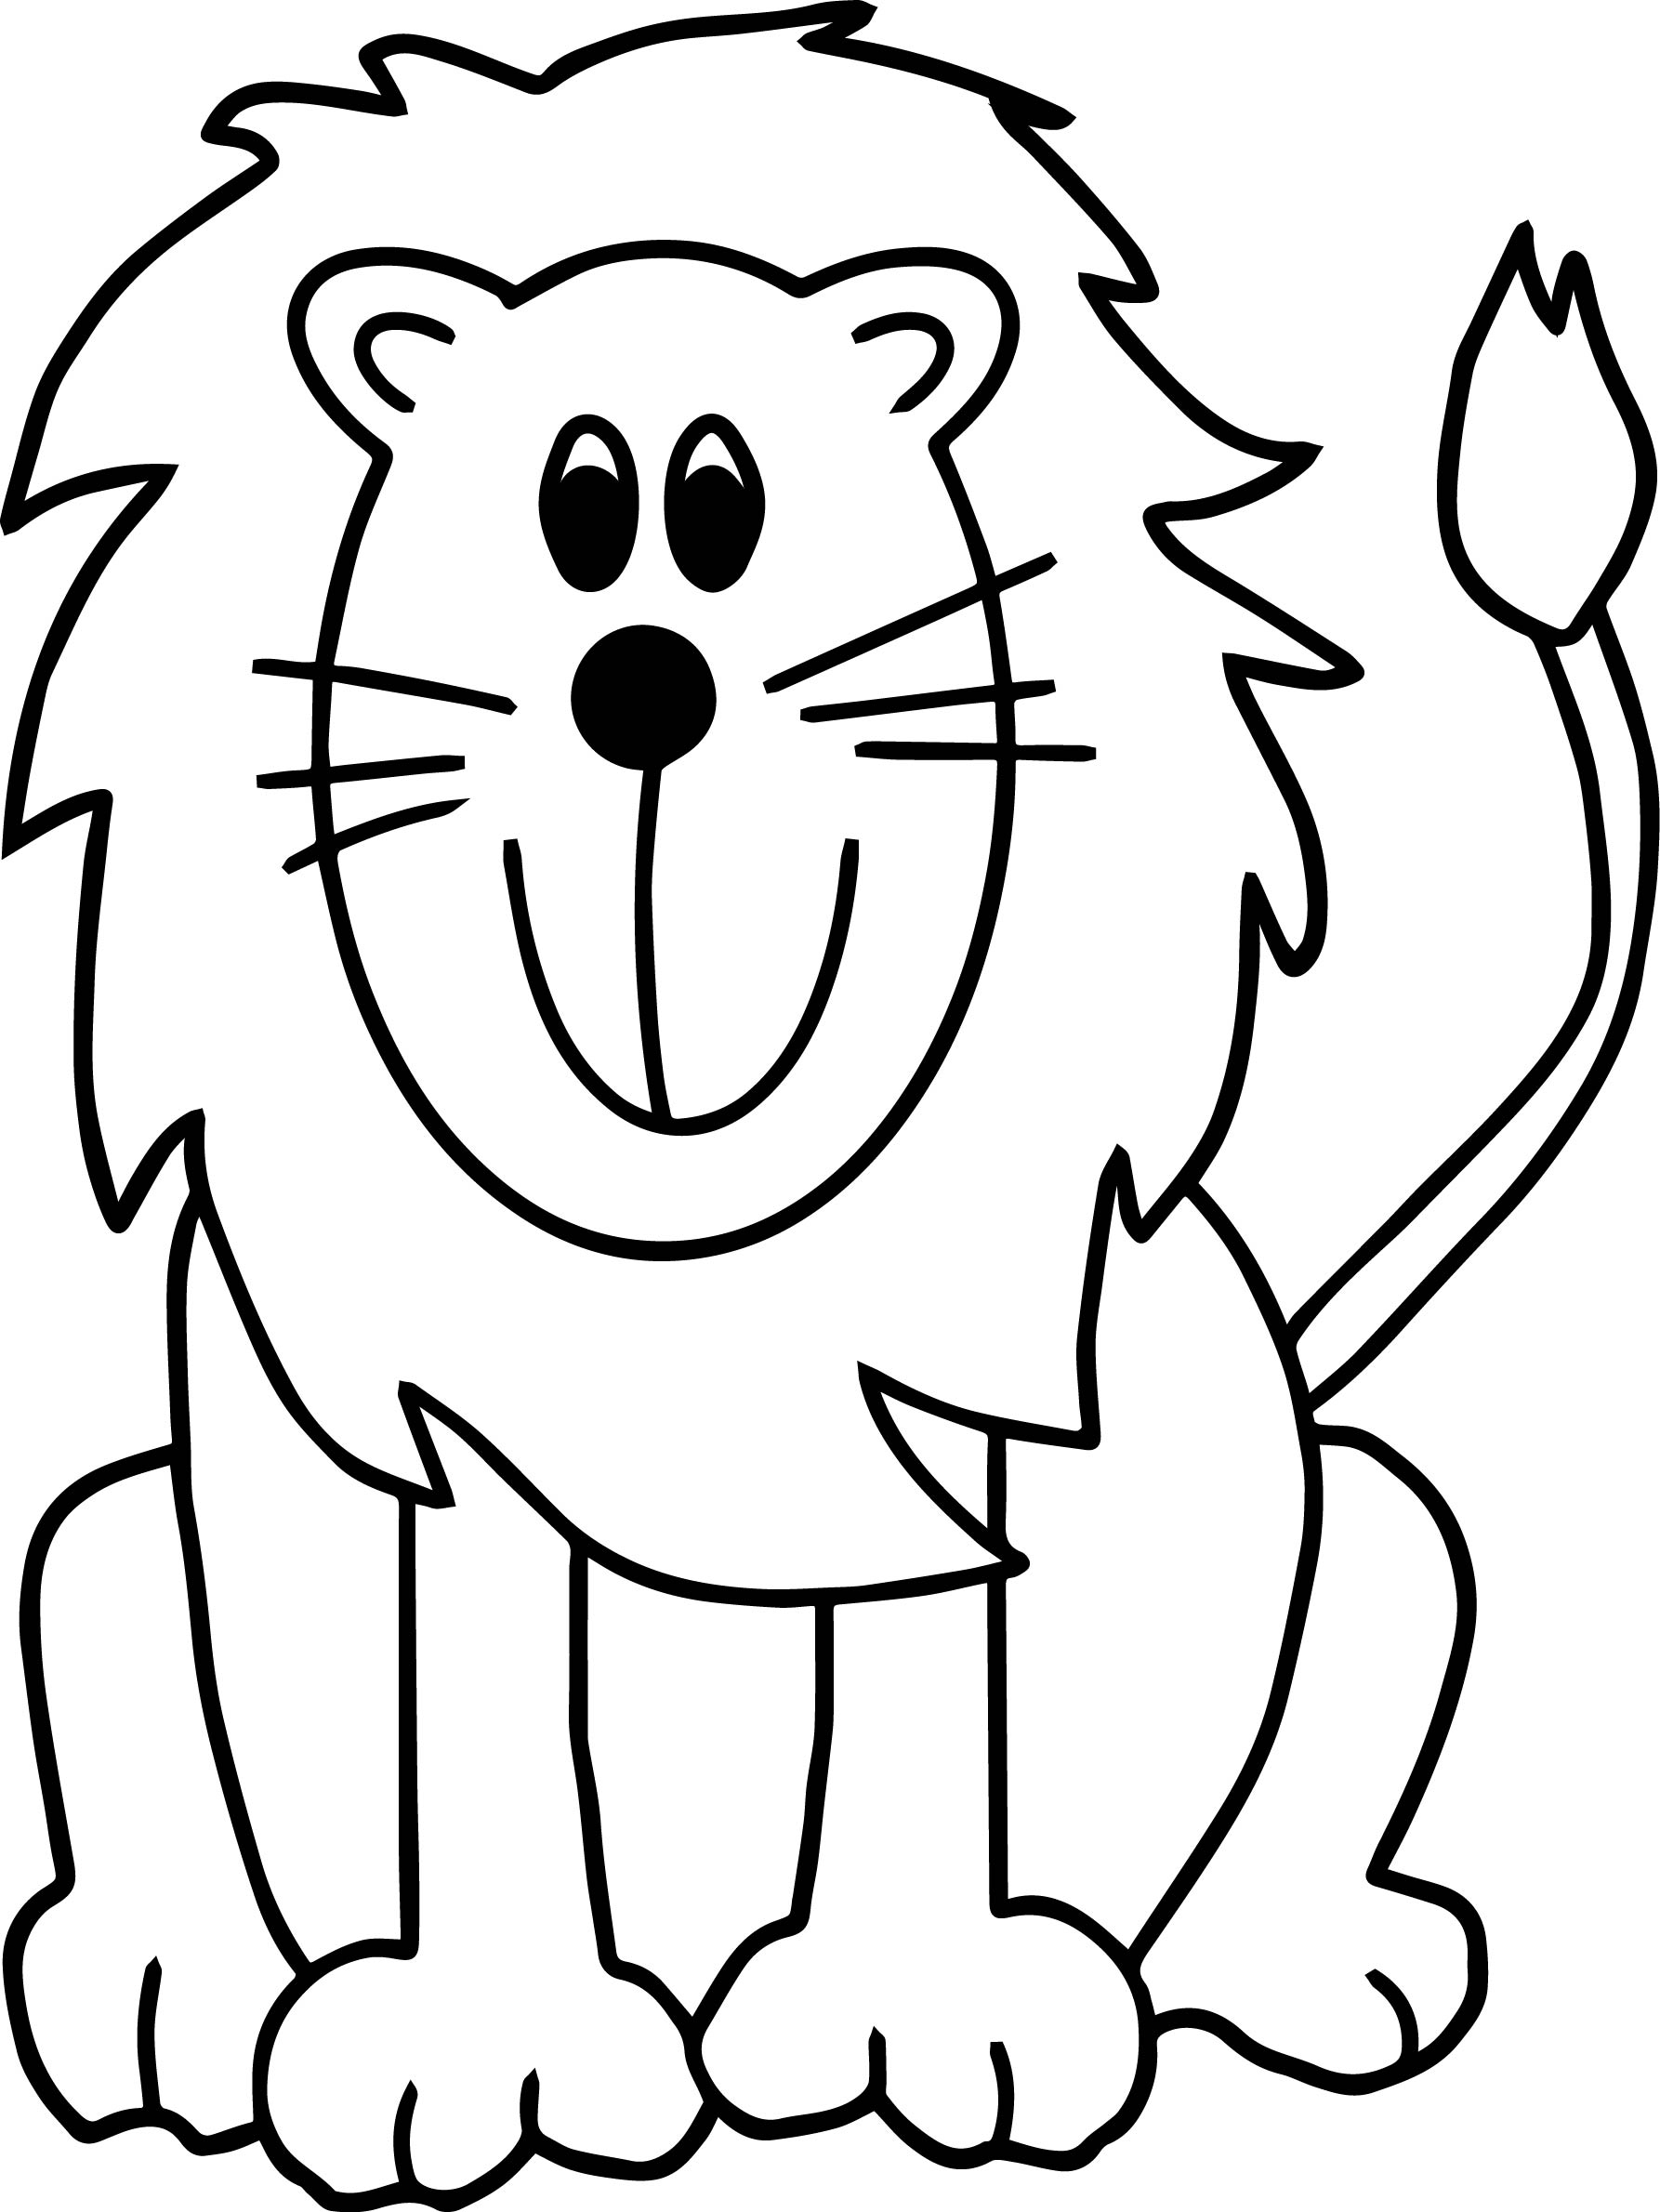 Zookeeper Coloring Page at Free printable colorings pages to print and color